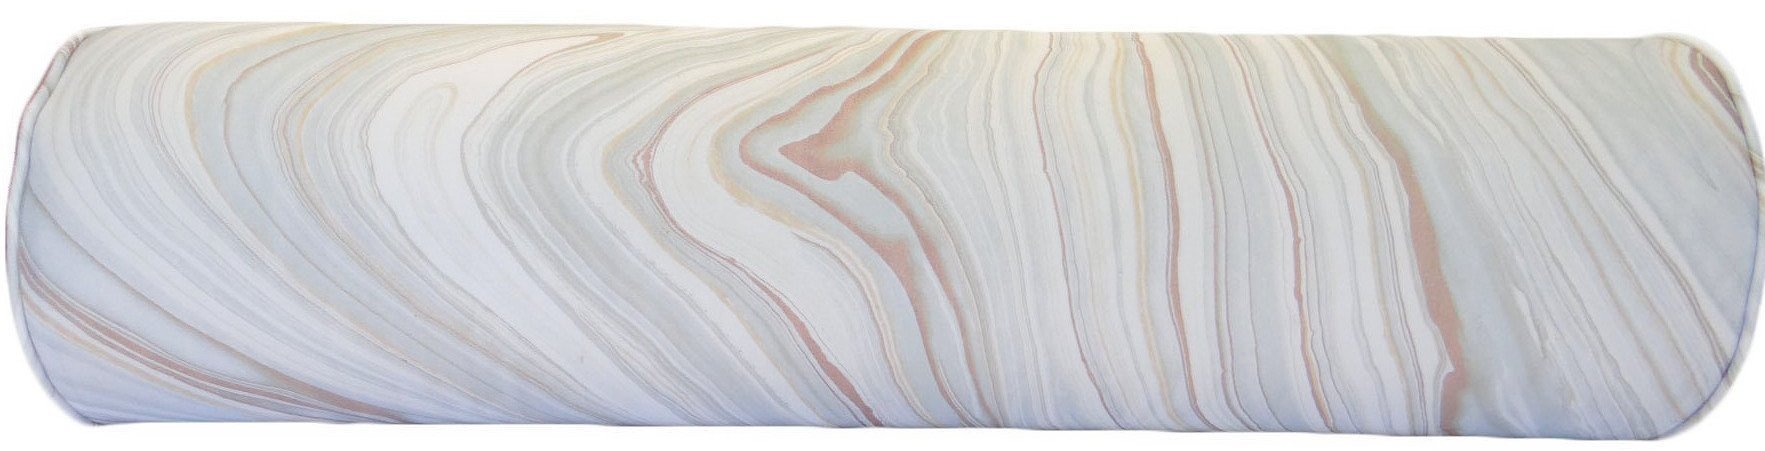 The Bolster :: Marble Movement // Cloud - TWIN // 9" X 24" - Image 1